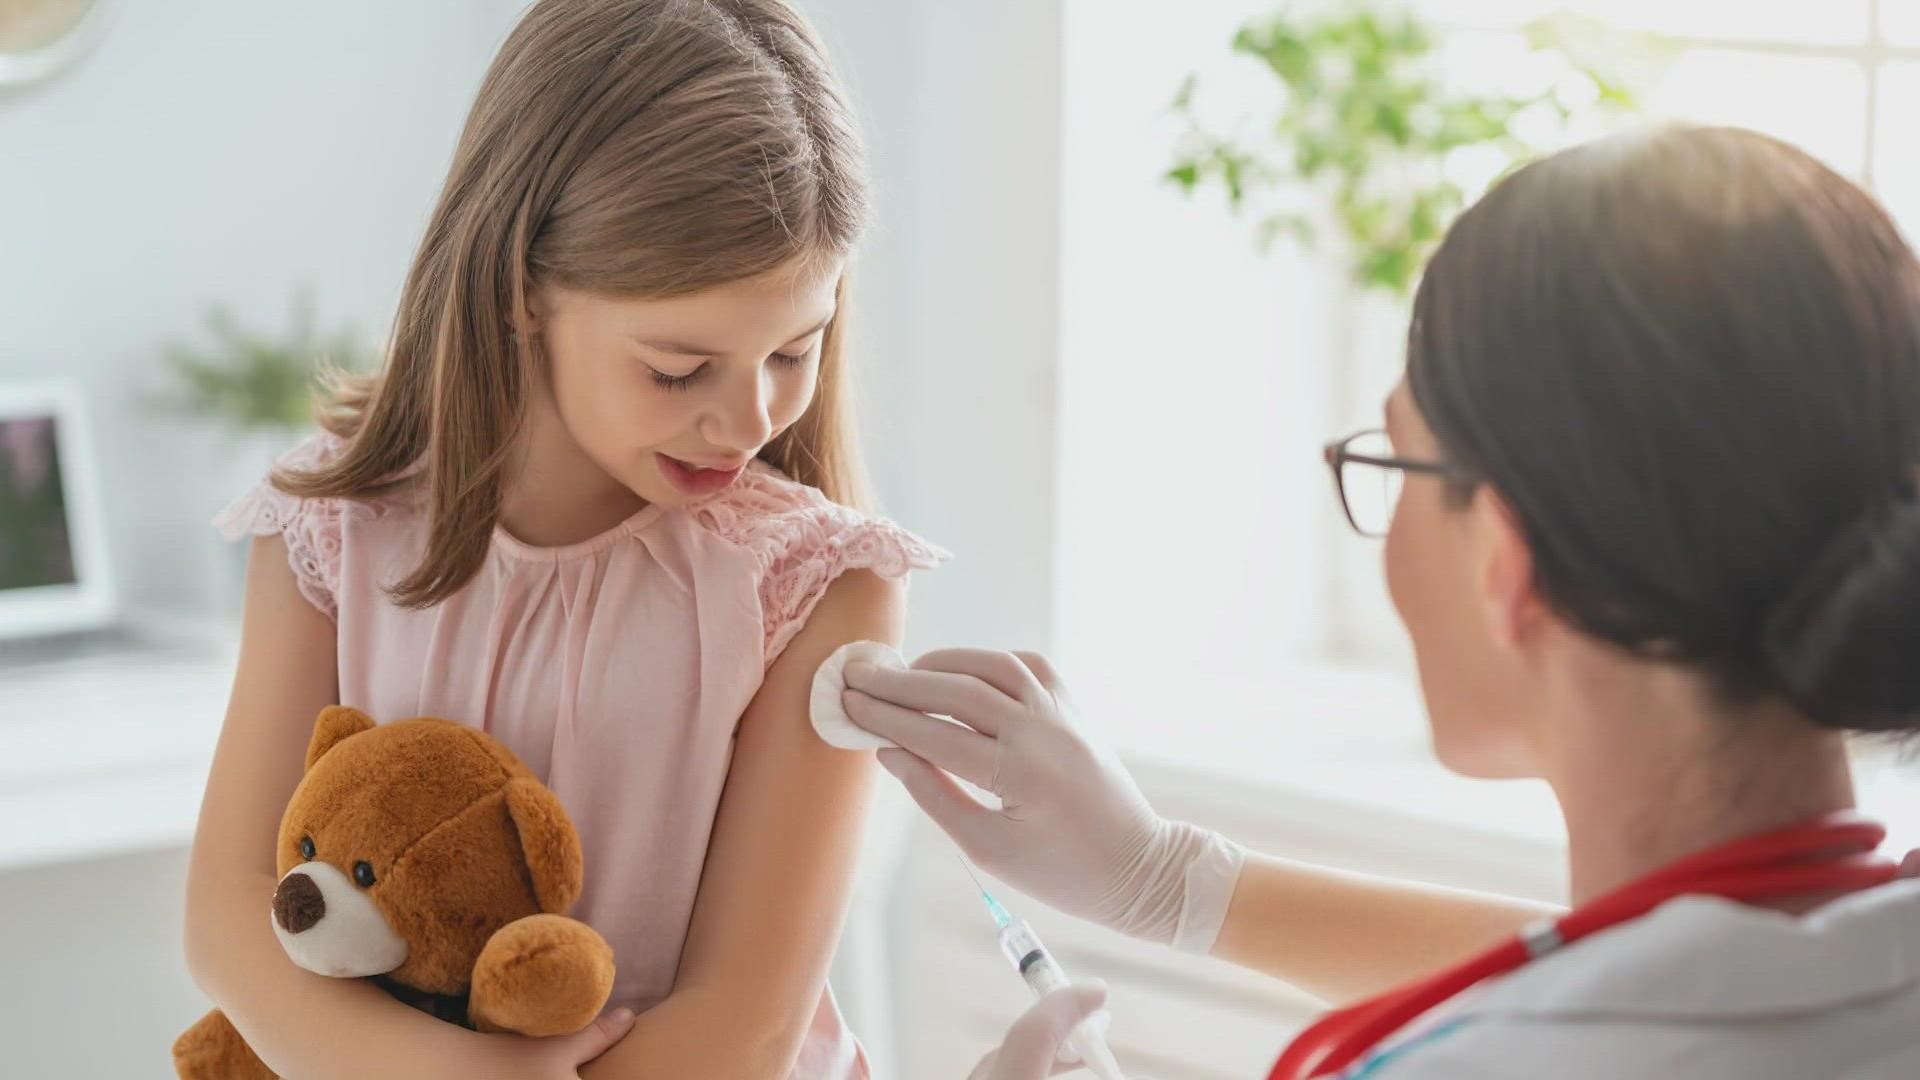 We spoke to some pediatricians about how experts decided the vaccine is safe for children.